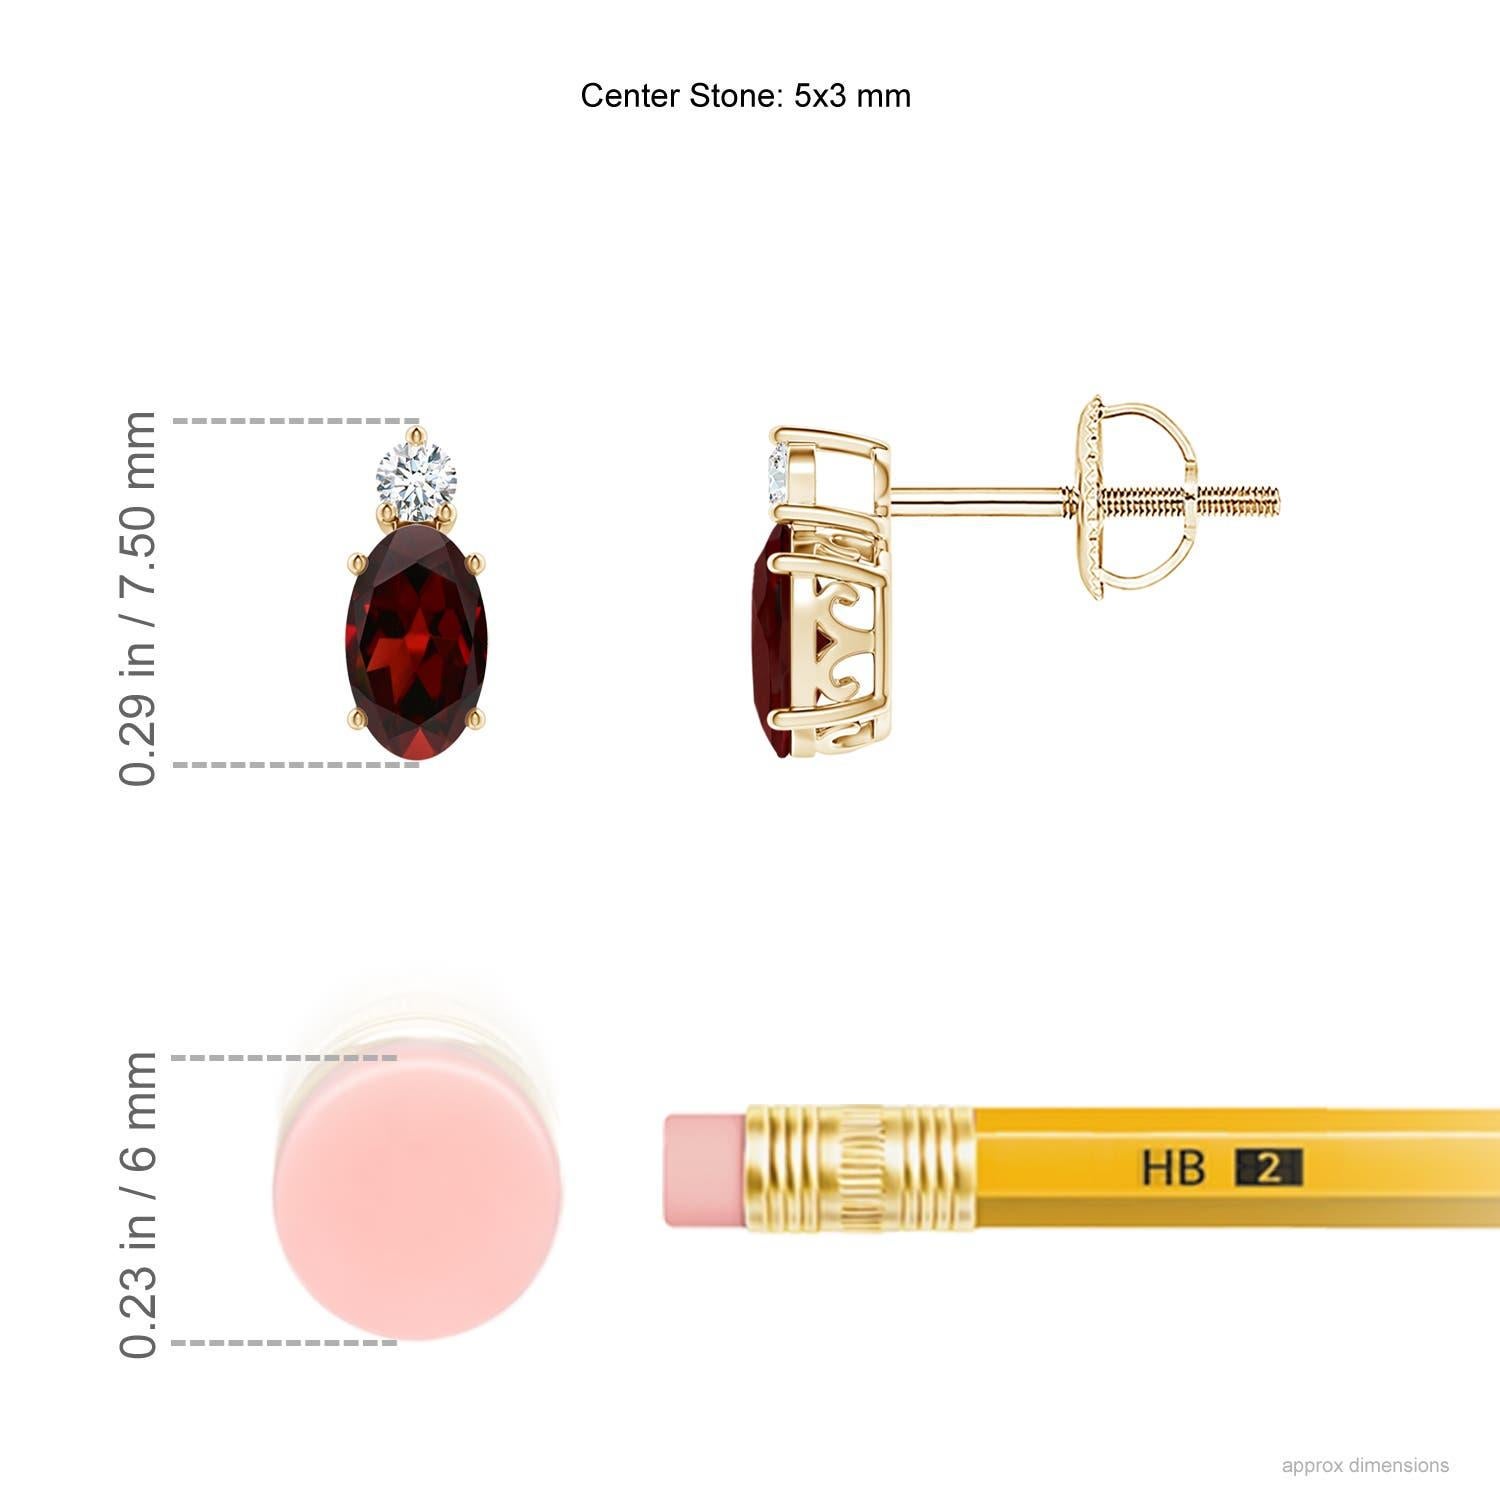 These stunning garnet stud earrings in 14k yellow gold with pretty scrollwork on the sides, exude an old-world charm. The intense red garnets are prong set and topped with round diamonds that sparkle brilliantly.